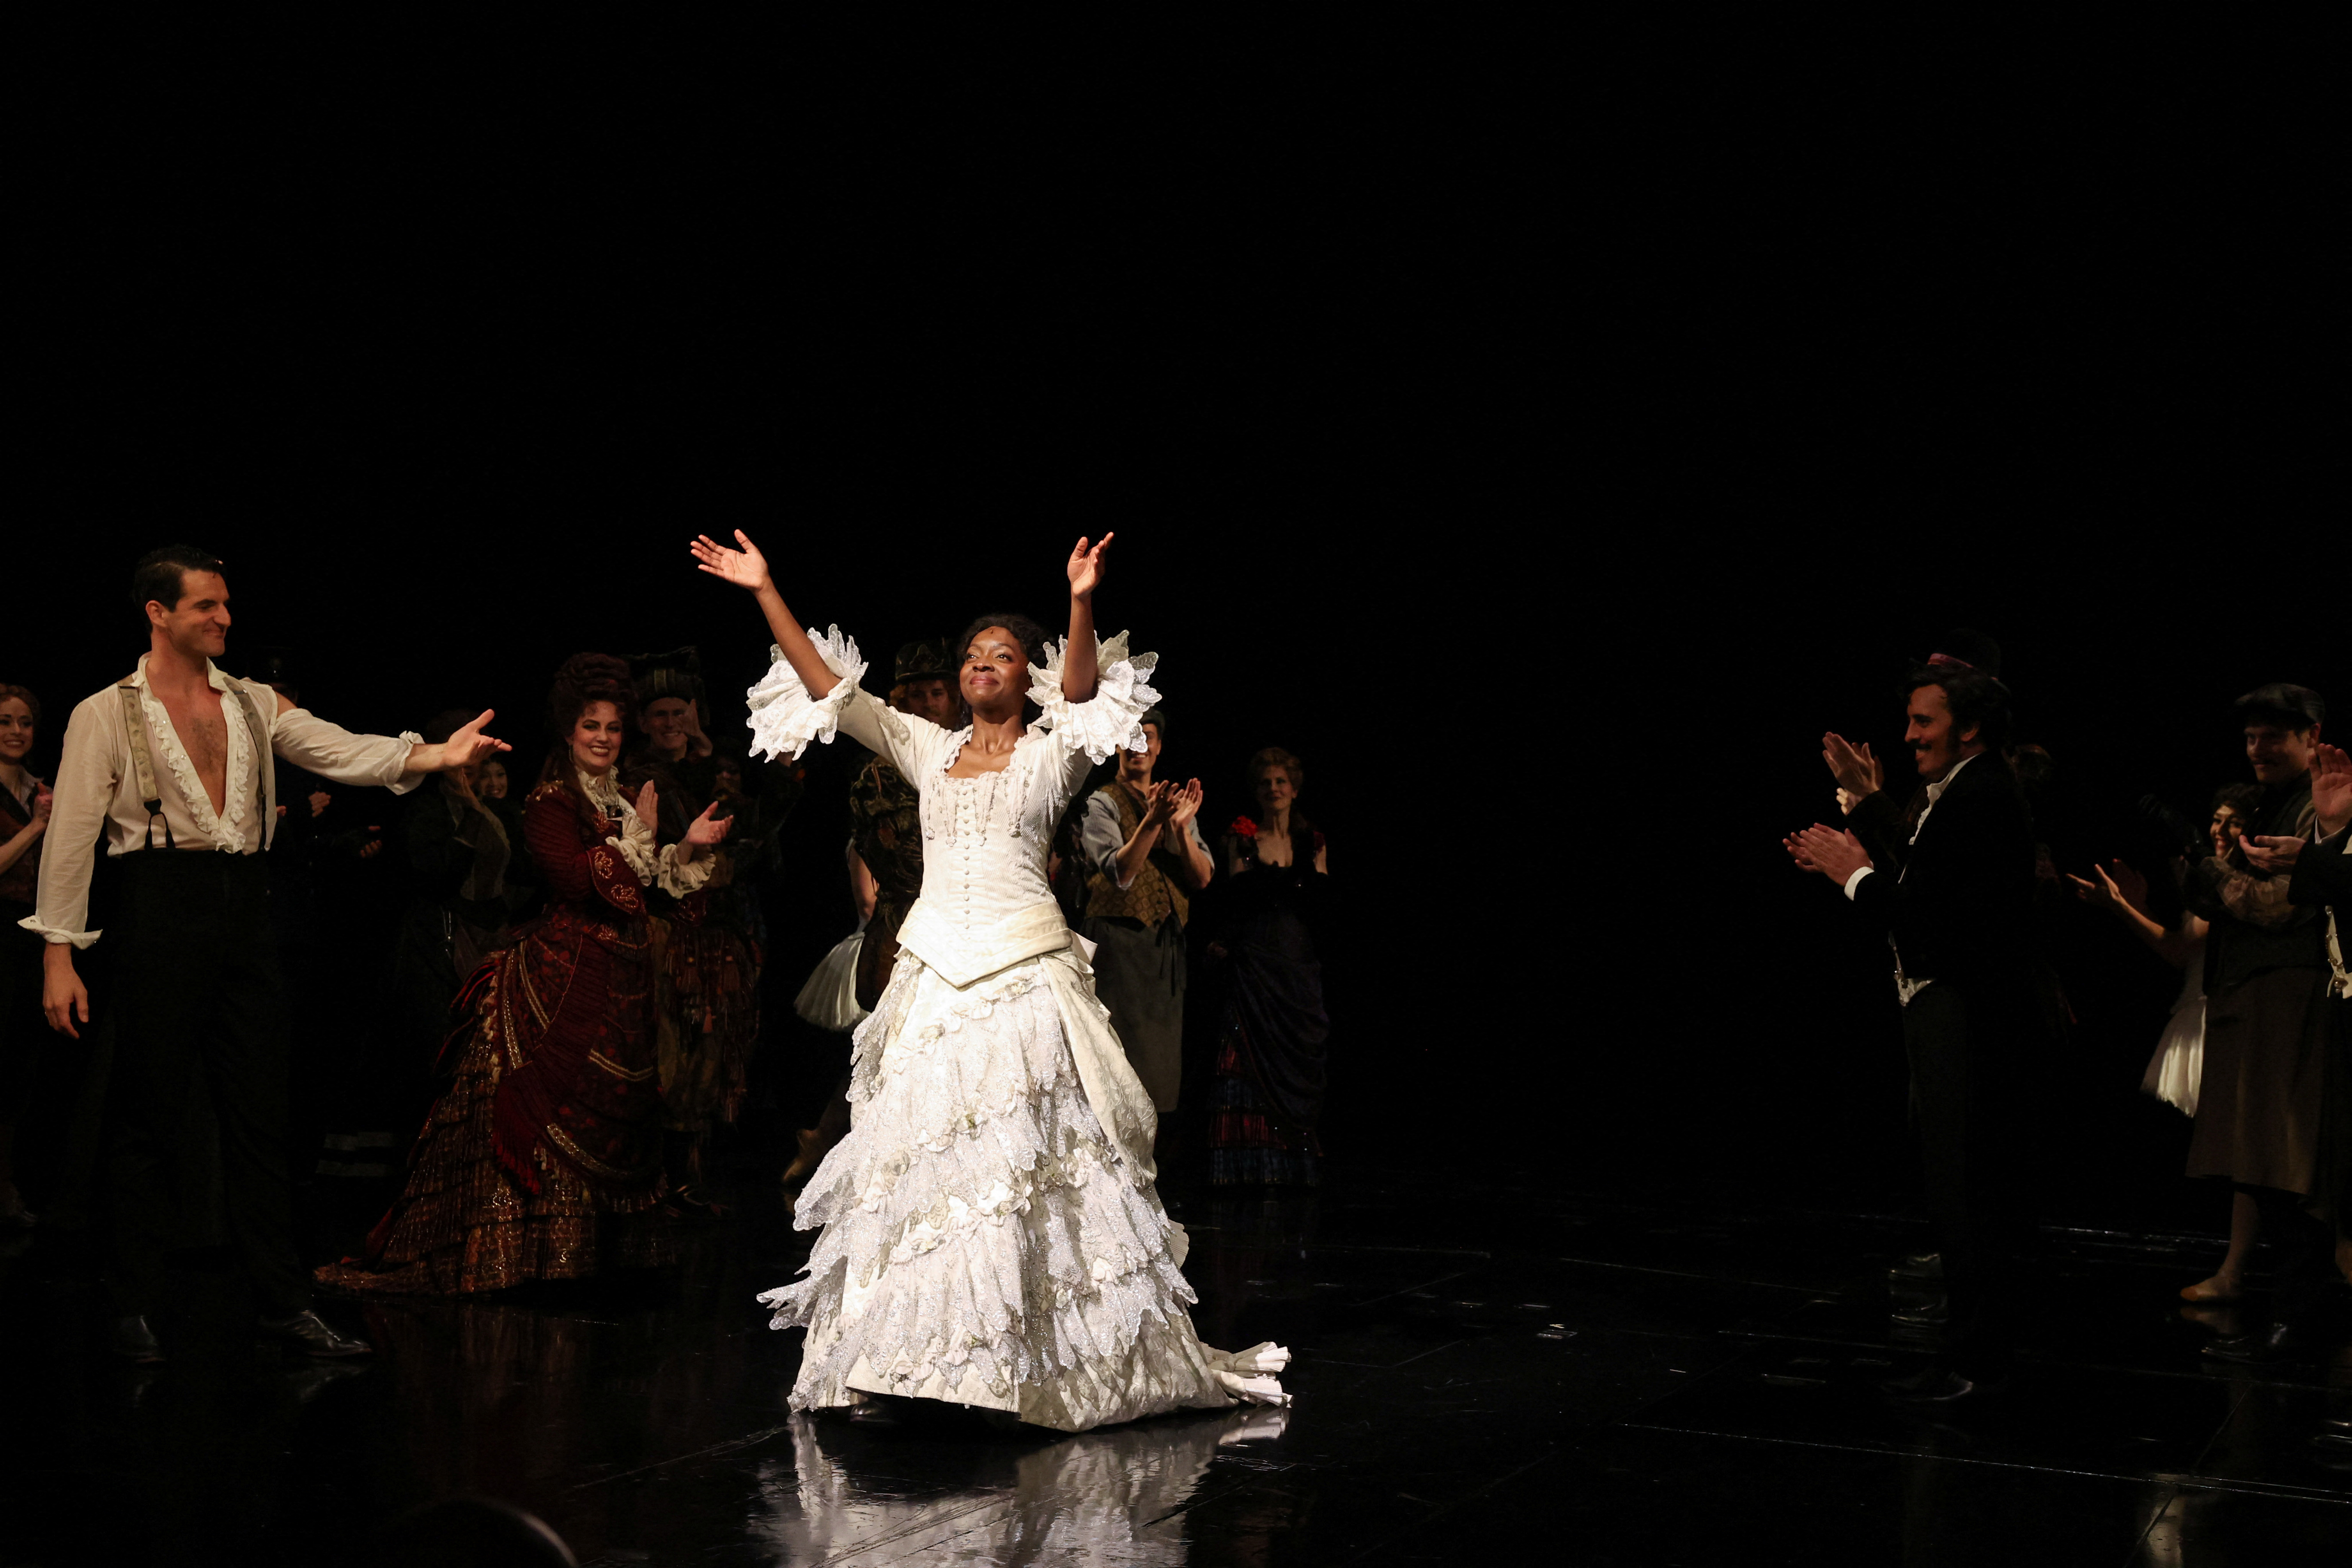 The actress Emilie Kouatchou saying goodbye on stage after her last performance.  (PHOTO: REUTERS/Caitlin Ochs)